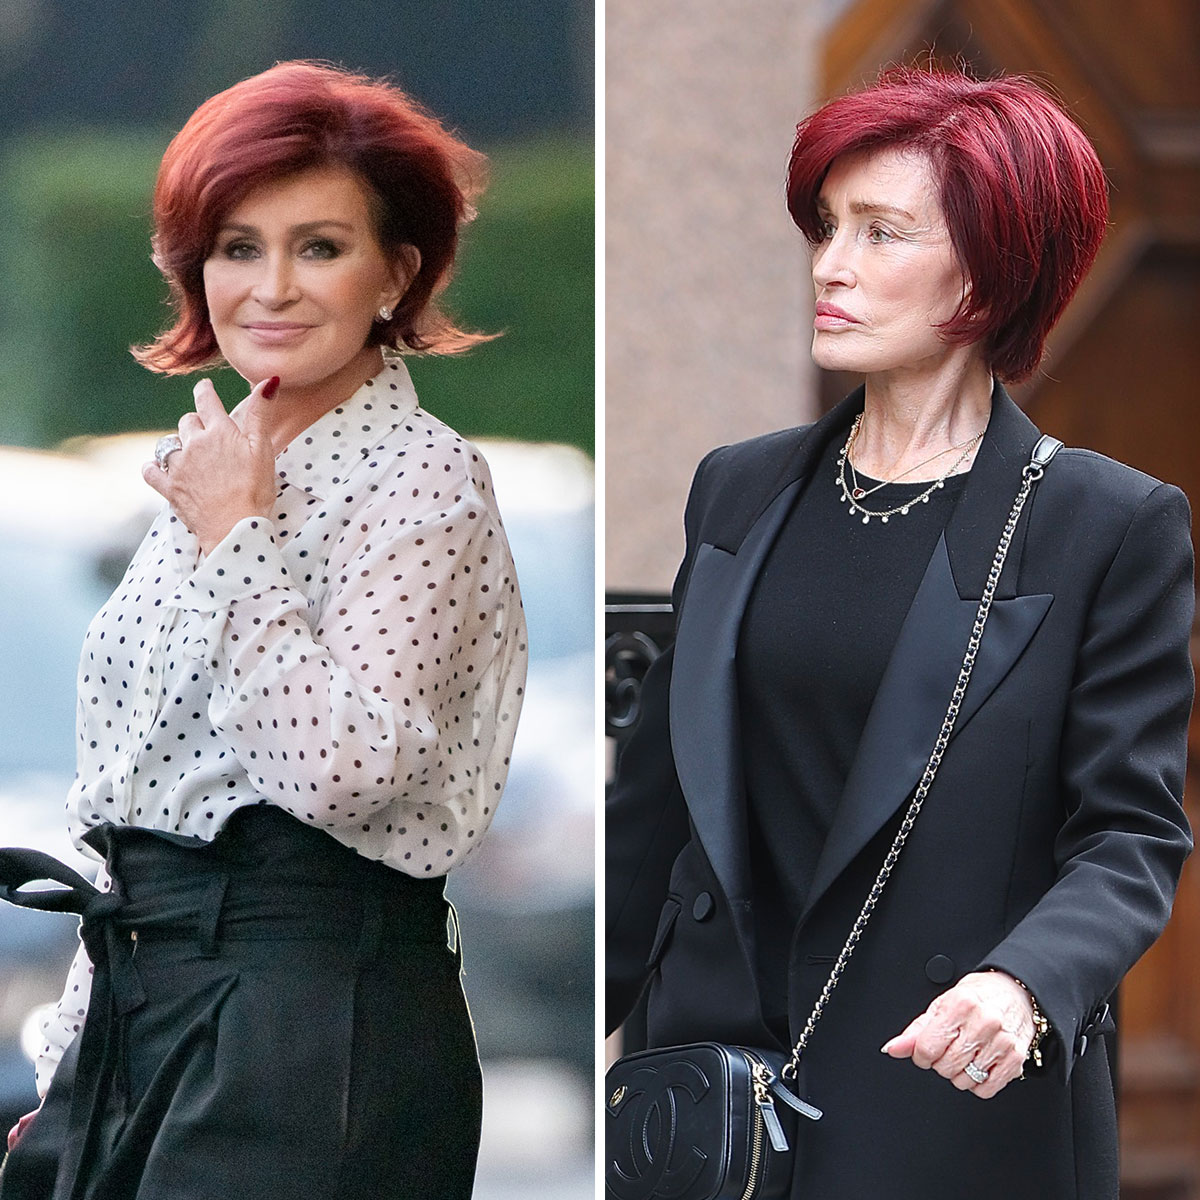 Fans Think Sharon Osbourne Looks 'So Thin And Fragile' After 40-Lb